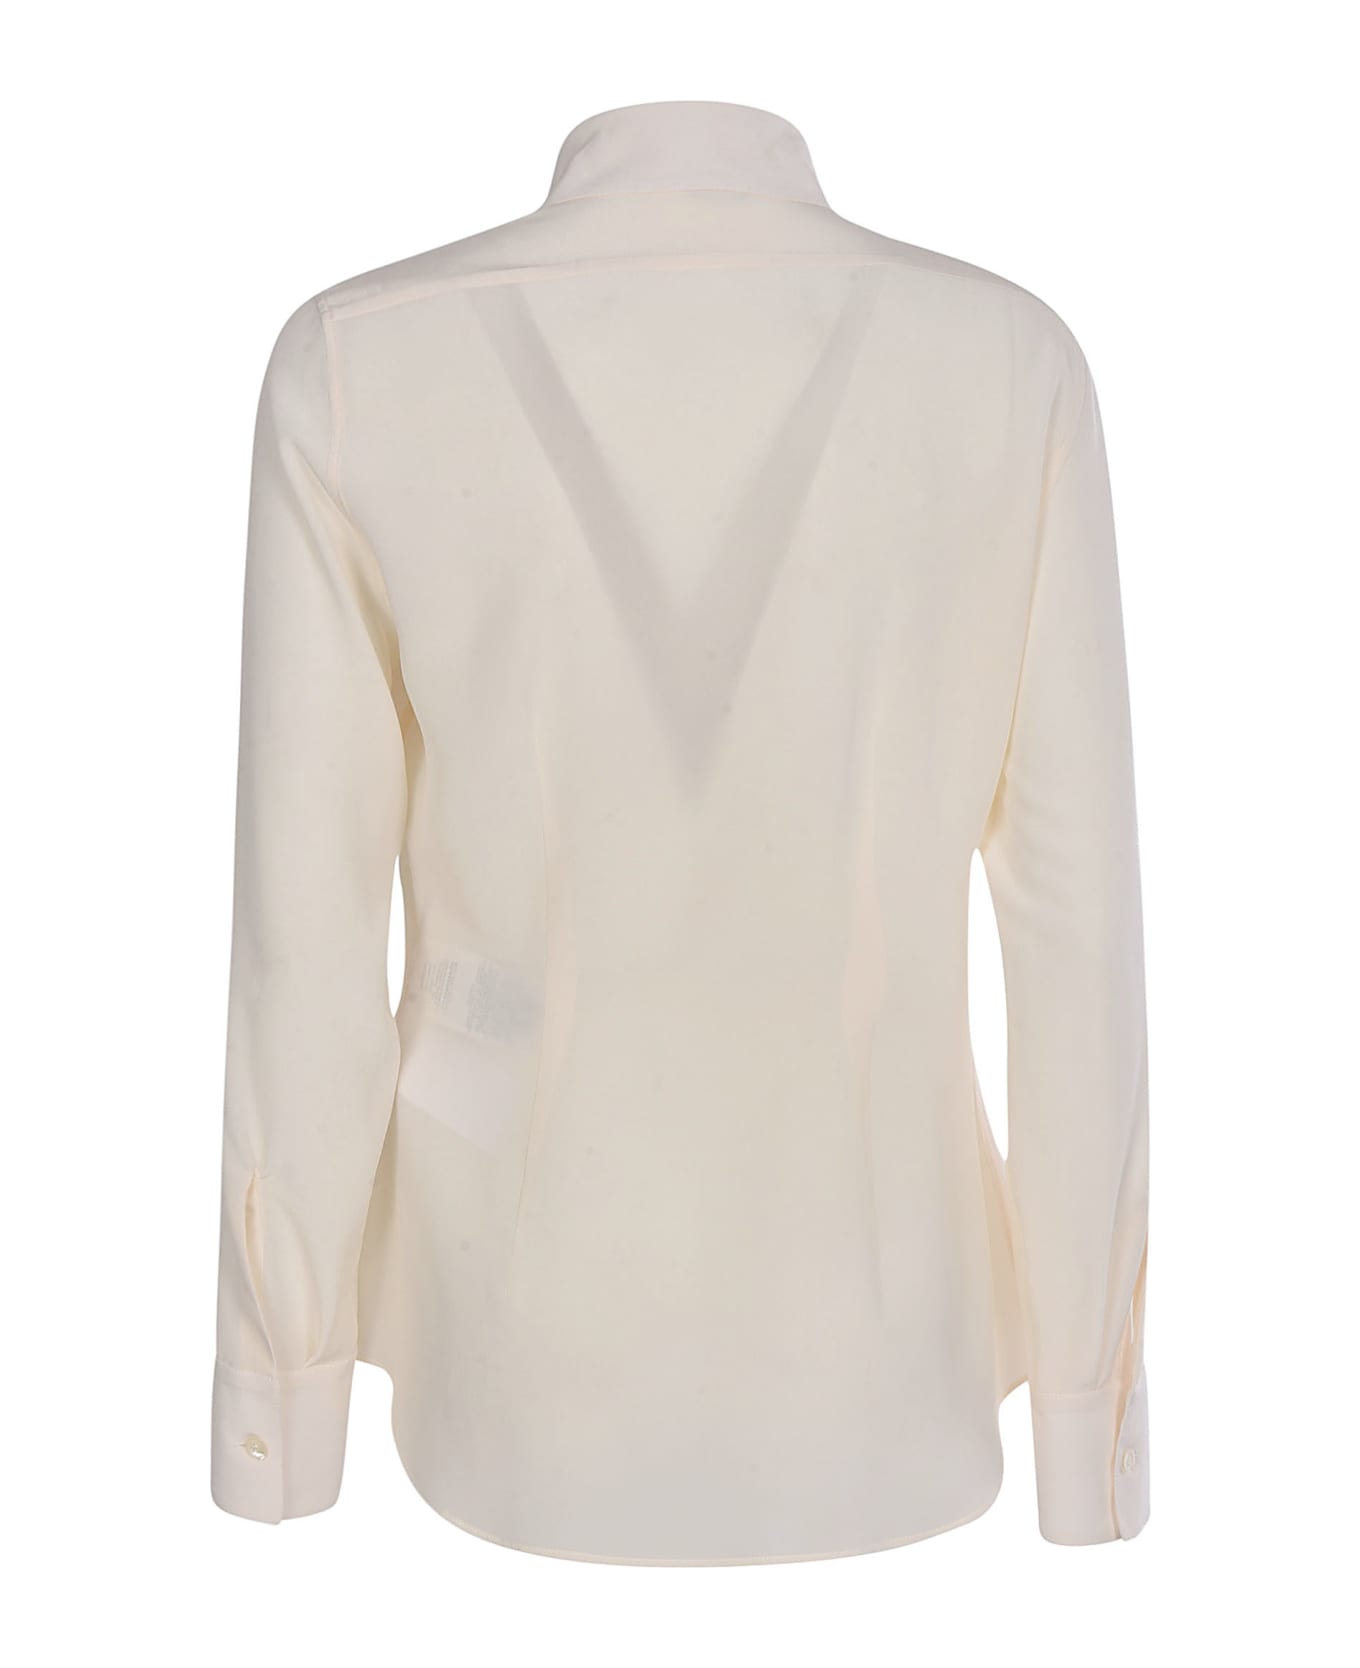 Stella McCartney It's Too Late To Go To Bed Shirt - Offwhite